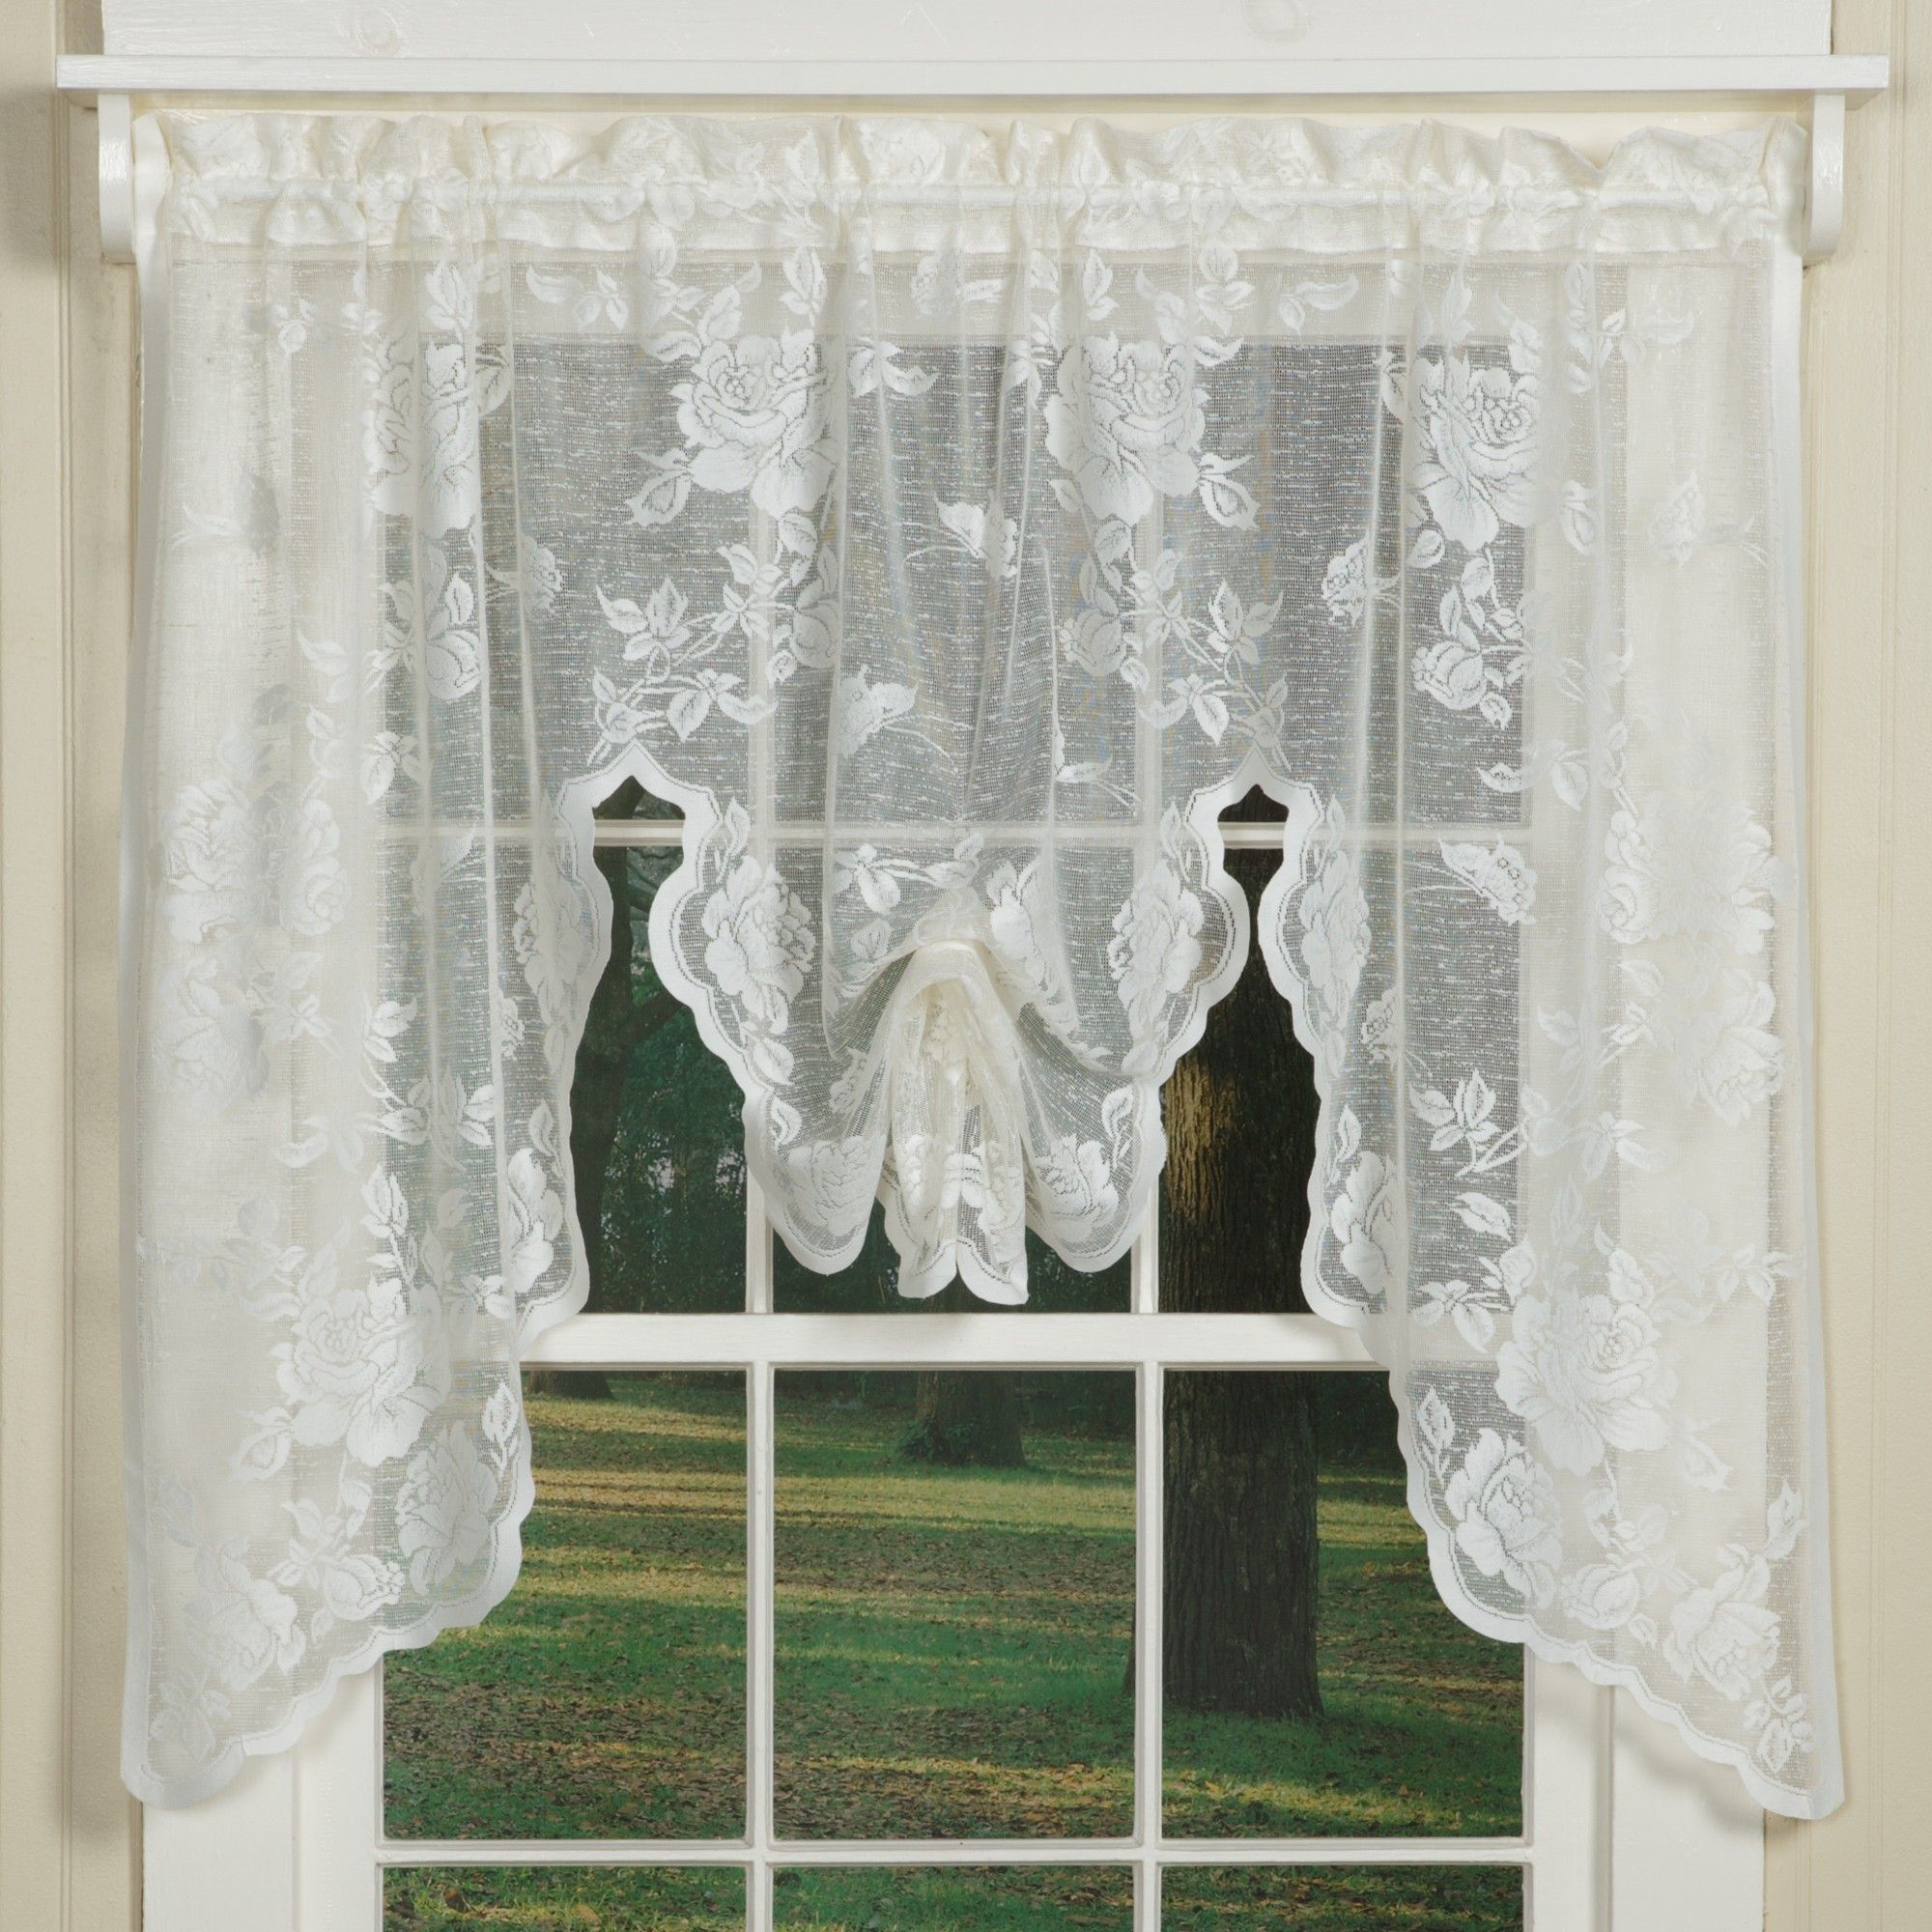 Elegant Country Style Curtains In Floral Lace Sturbridge Yankee With Lace Curtains (View 22 of 25)